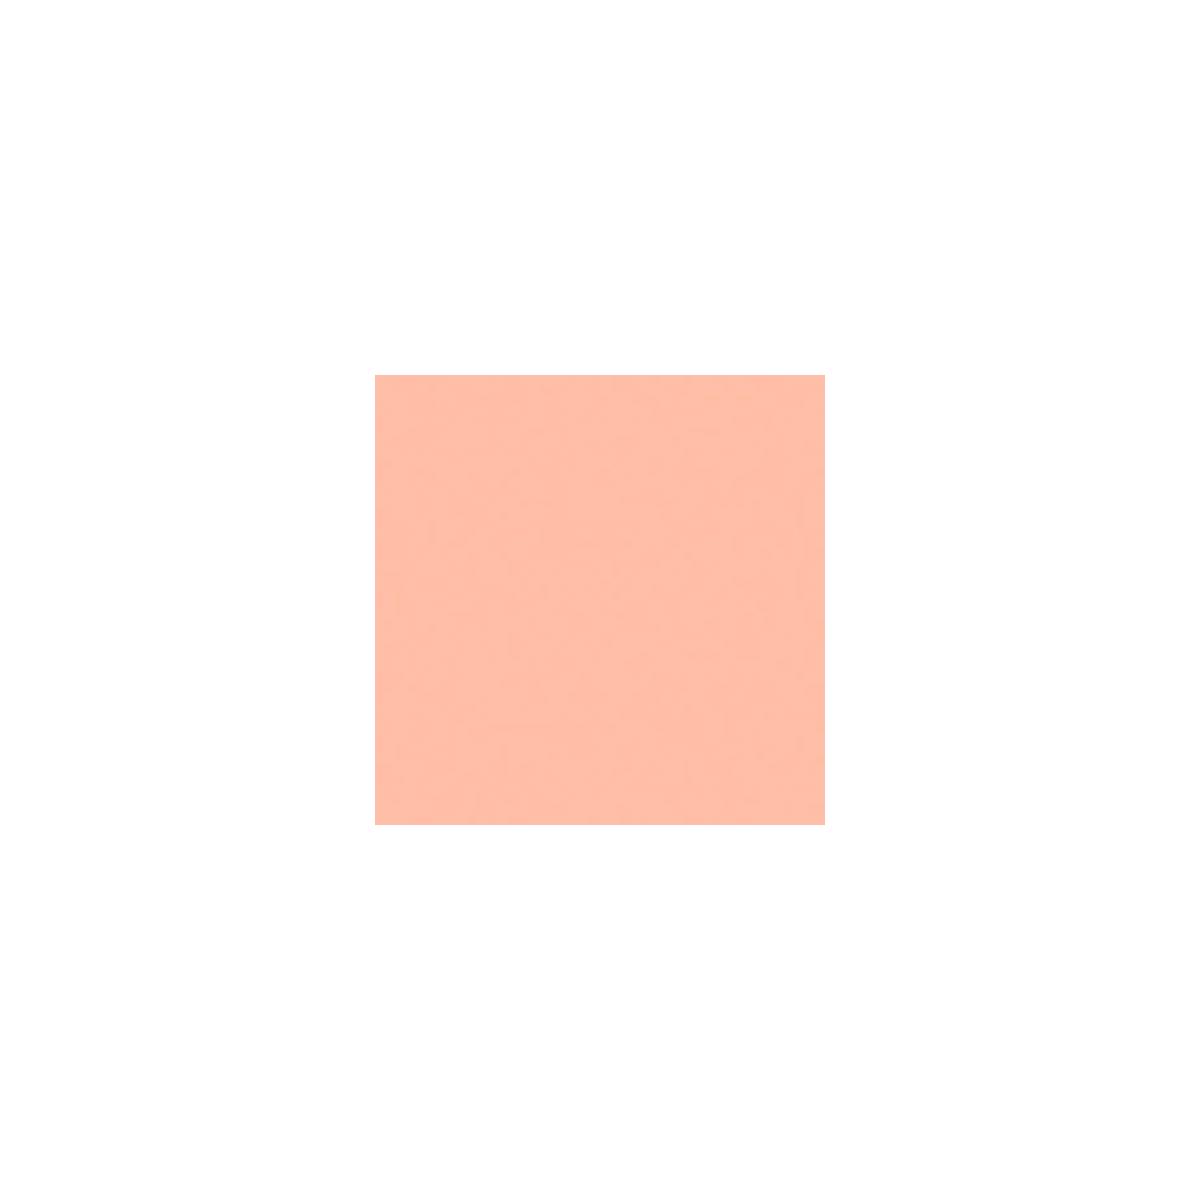 Image of Rosco 304 Roscolux Pale Apricot